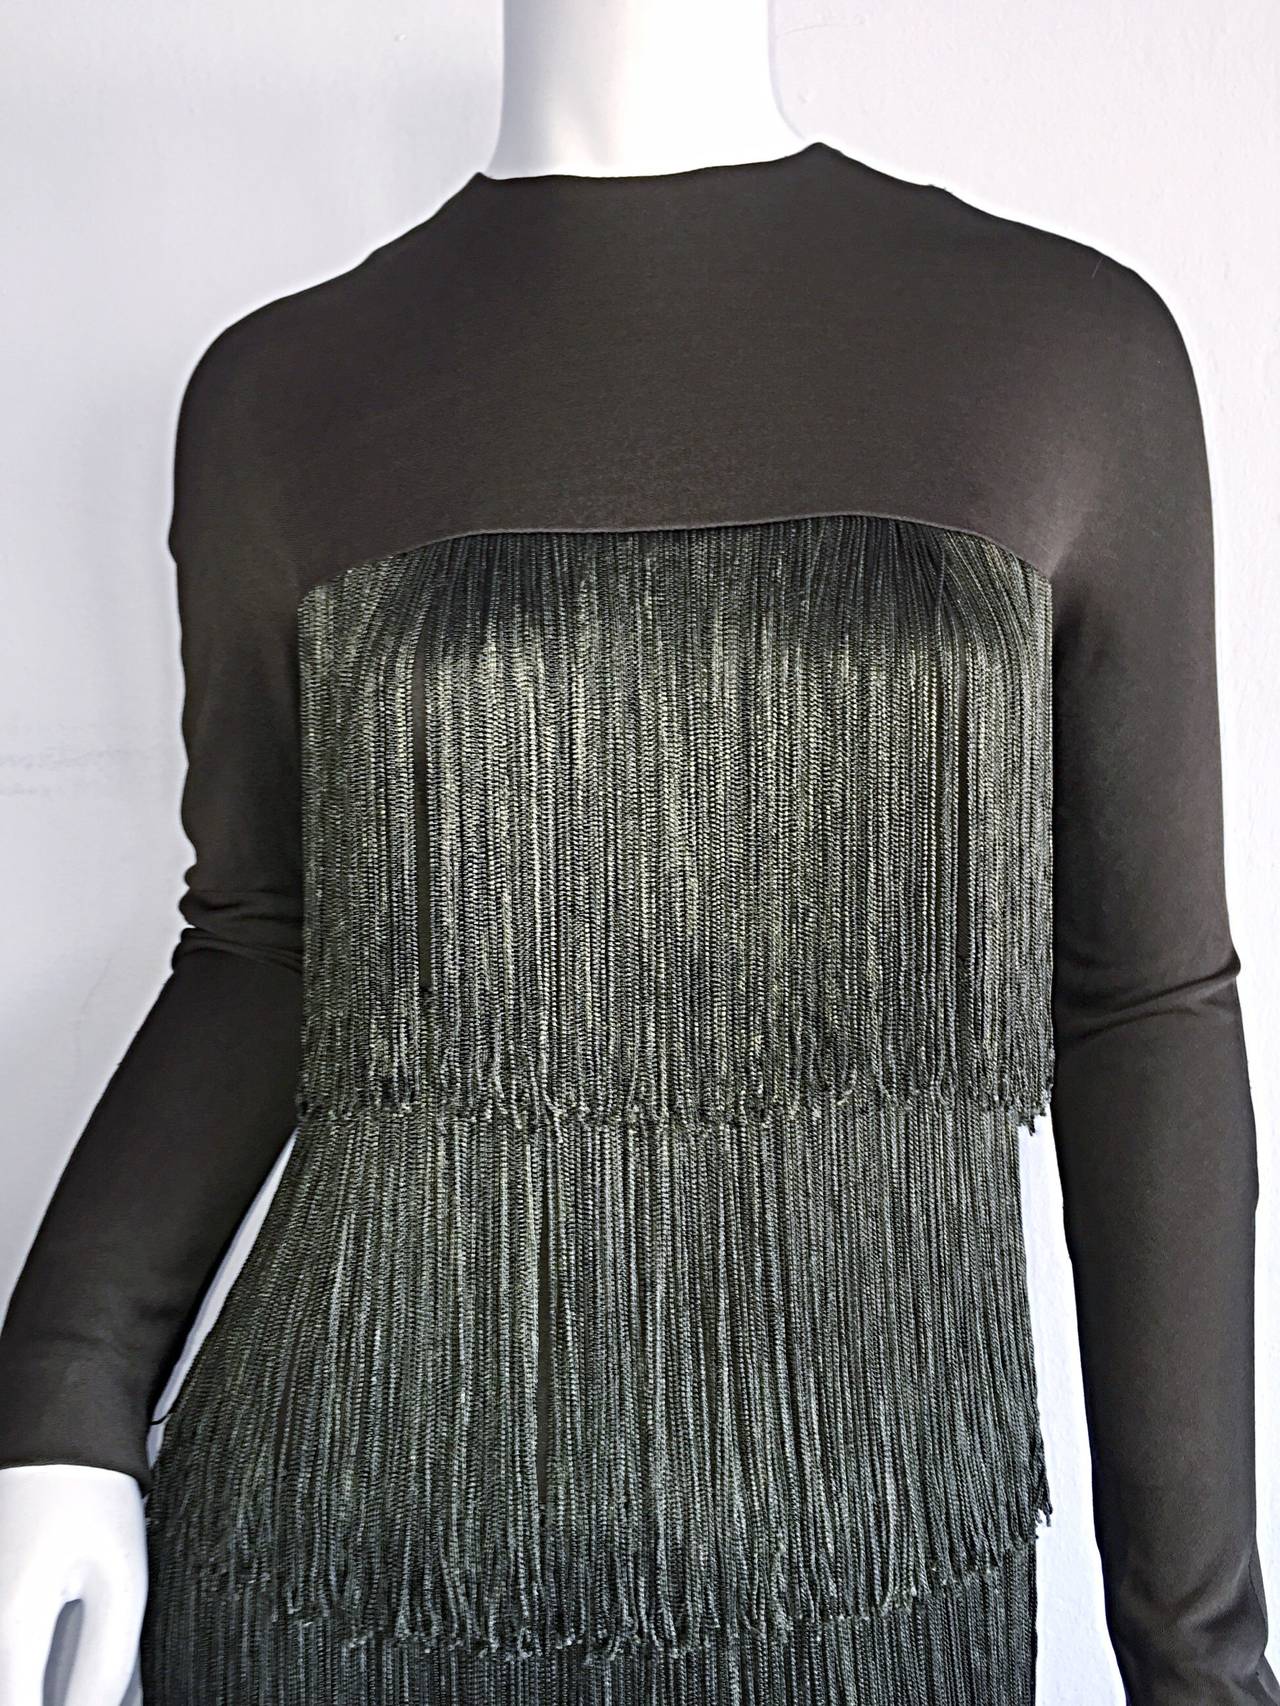 Superb Vintage Bill Blass fringe dress!!! Columns of silk fringe, with a double lined matching jersey bodice. Hidden zipper up the back, with hook-and-eye closure. A true masterpiece, that is an iconic Blass trophy. Musuem worthy. Approximately Size